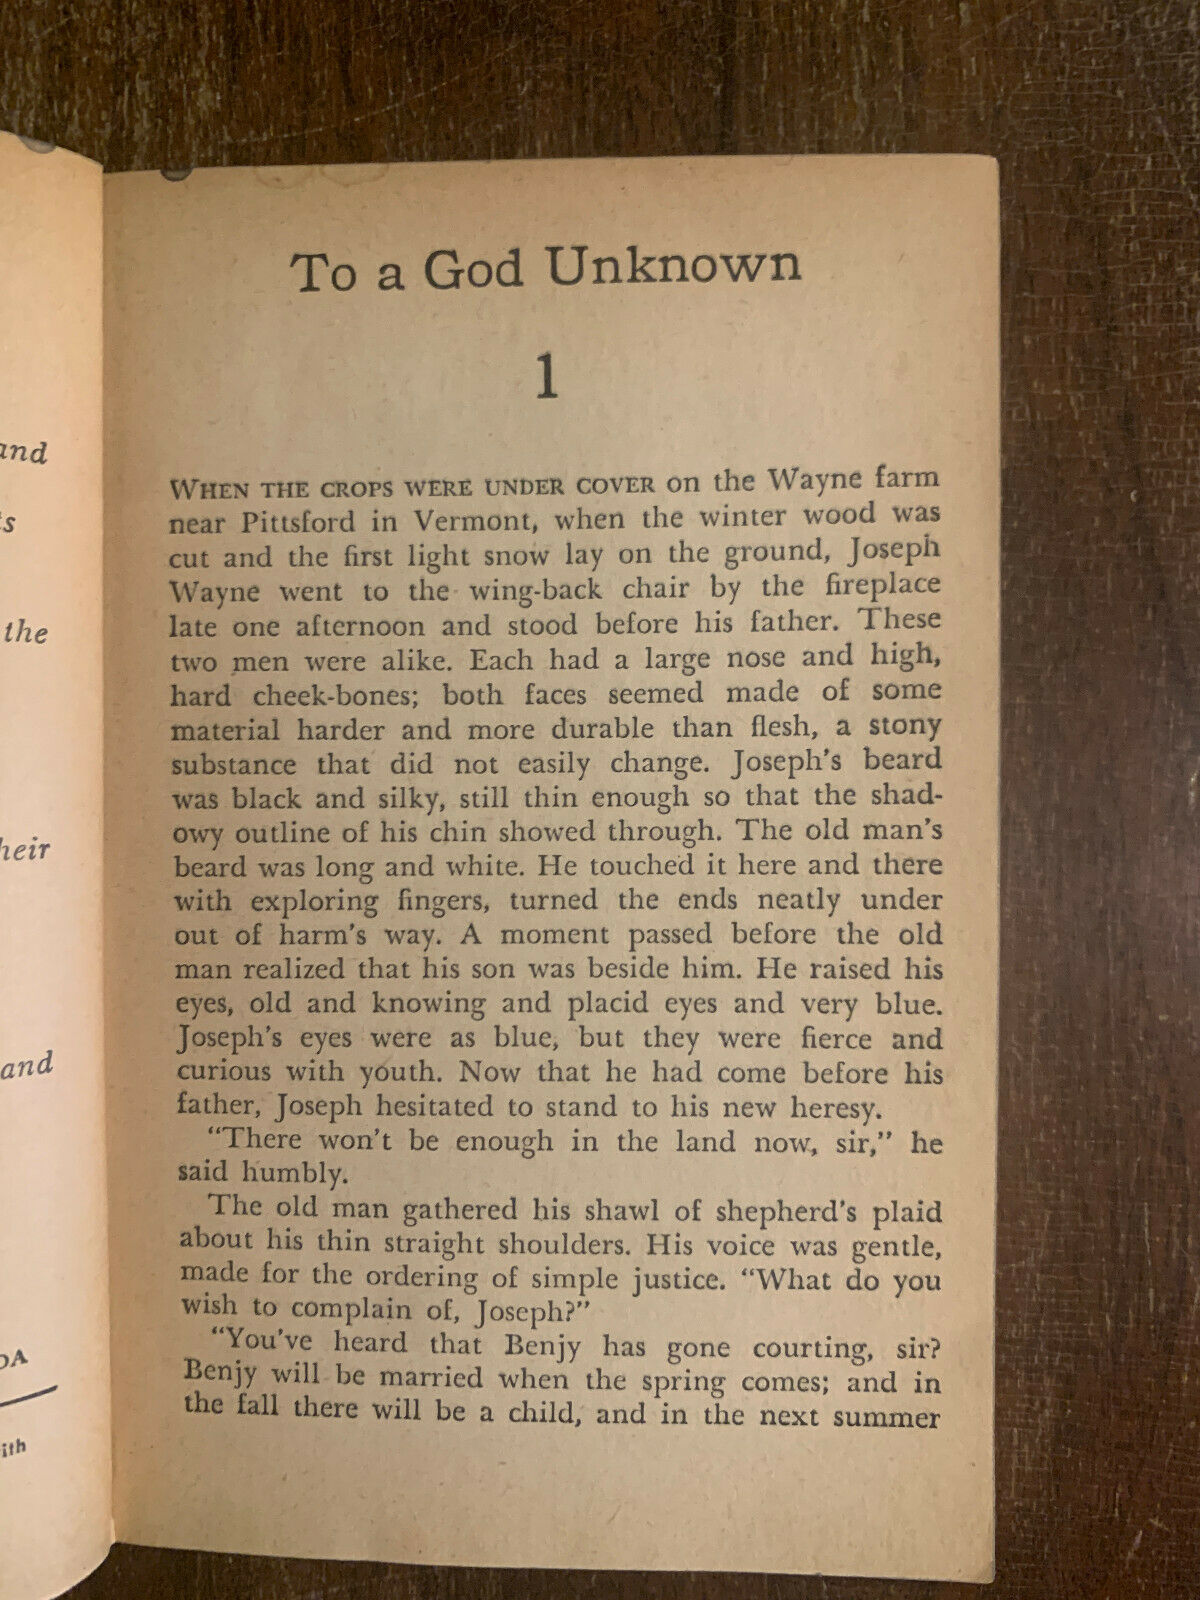 To A God Unknown by John Steinbeck- Dell Paperback #358-Post 1947 (4B)